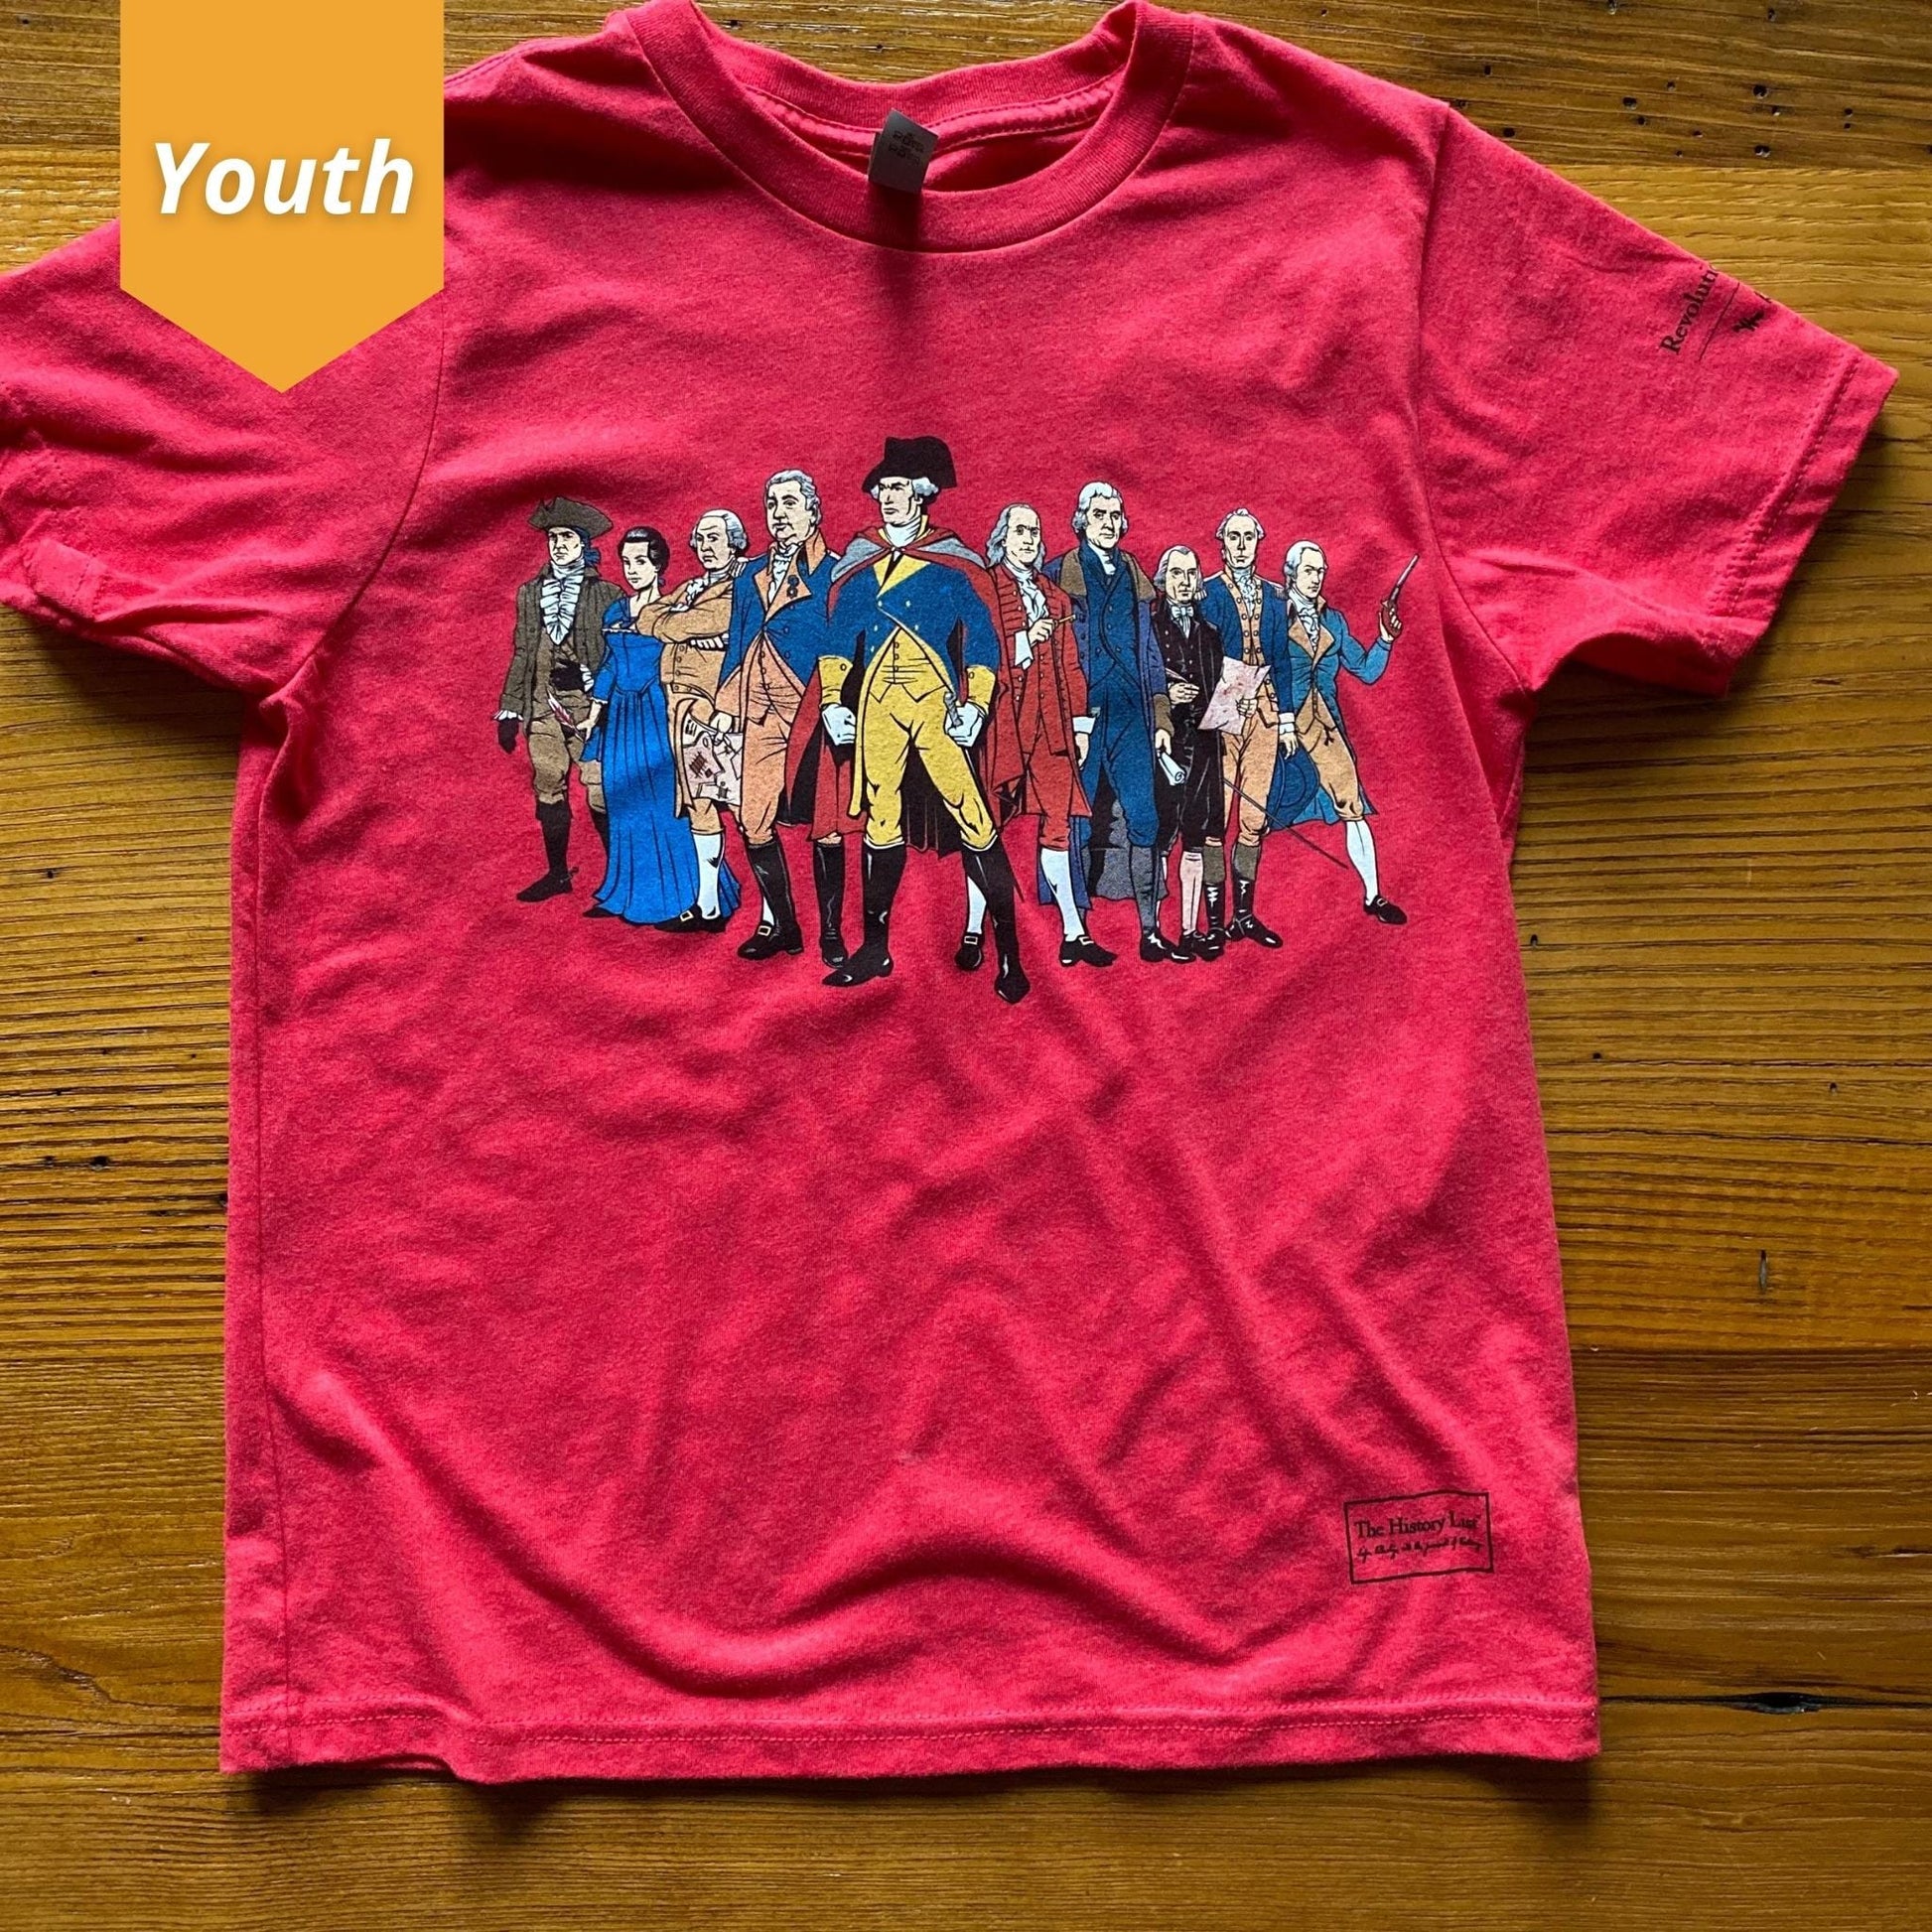 Ten "Revolutionary Superheroes" Shirt in Youth sizes from the History List store